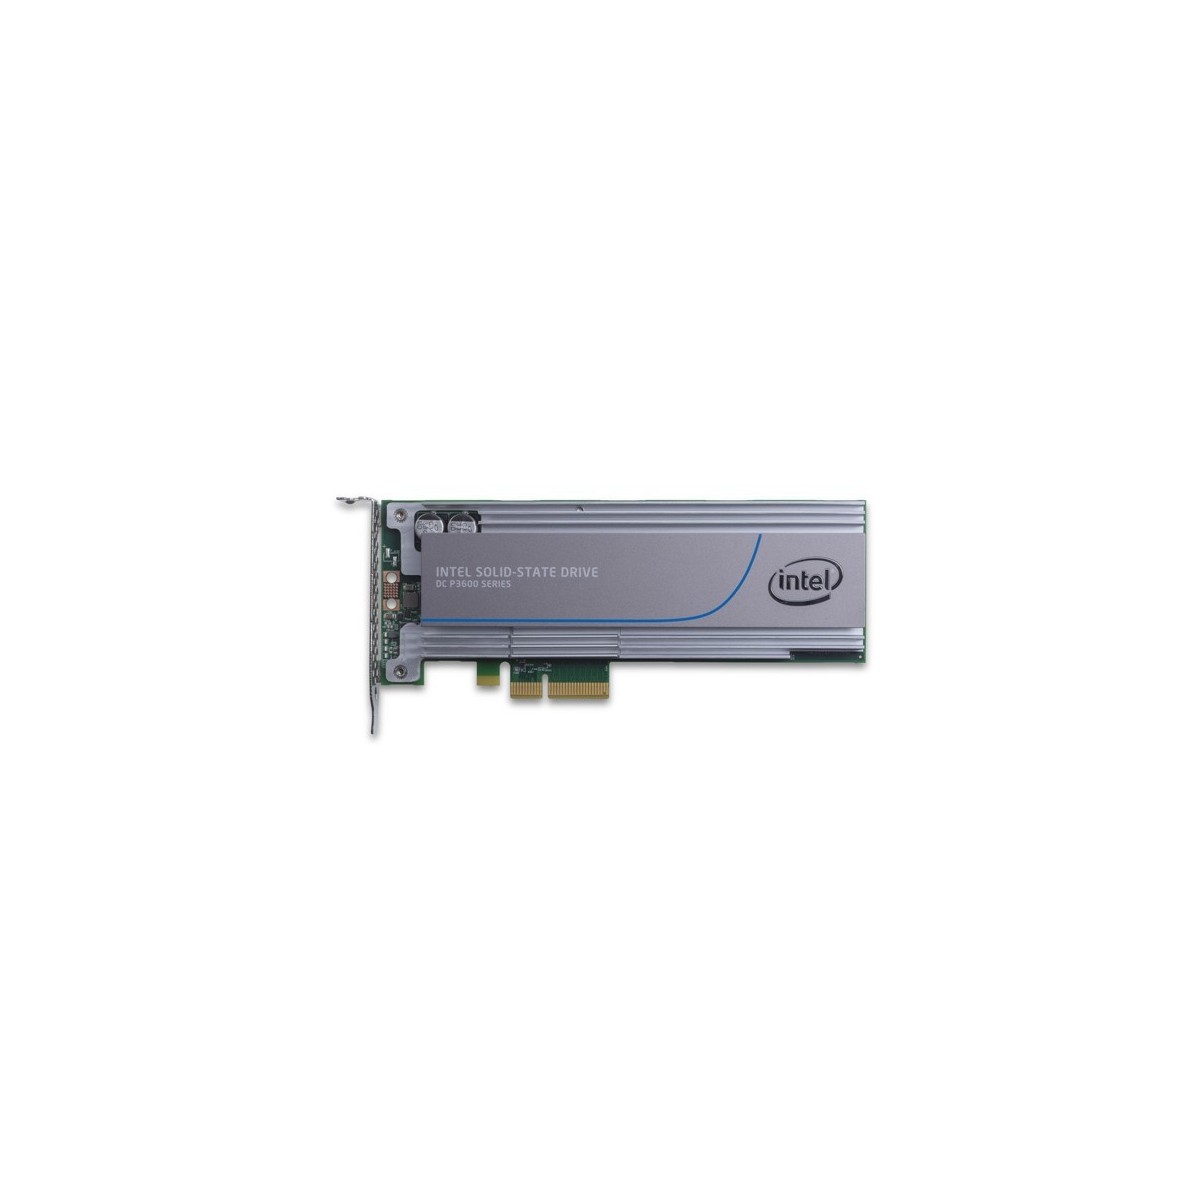 Intel Solid-State Drive DC P3600 Series NVMe 2,000 GB - Solid State Disk - Internal